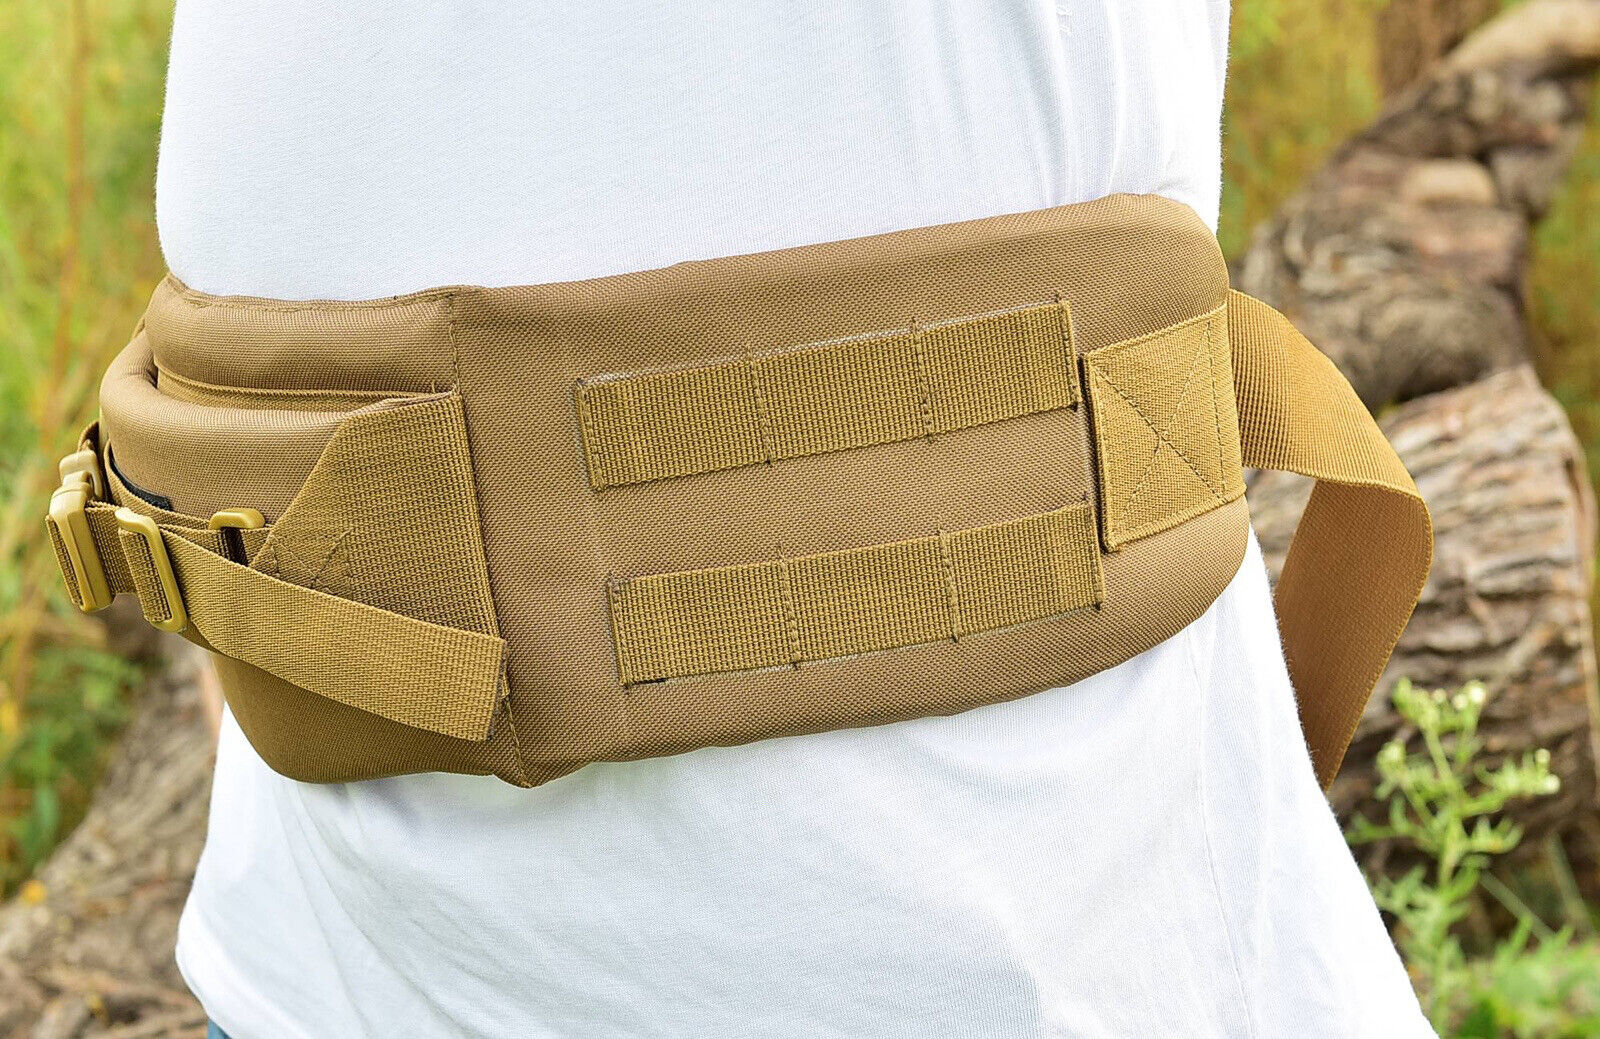 Military Alice Pack , Kidney Pad & Waist Belt hiking camping hunting outdoor